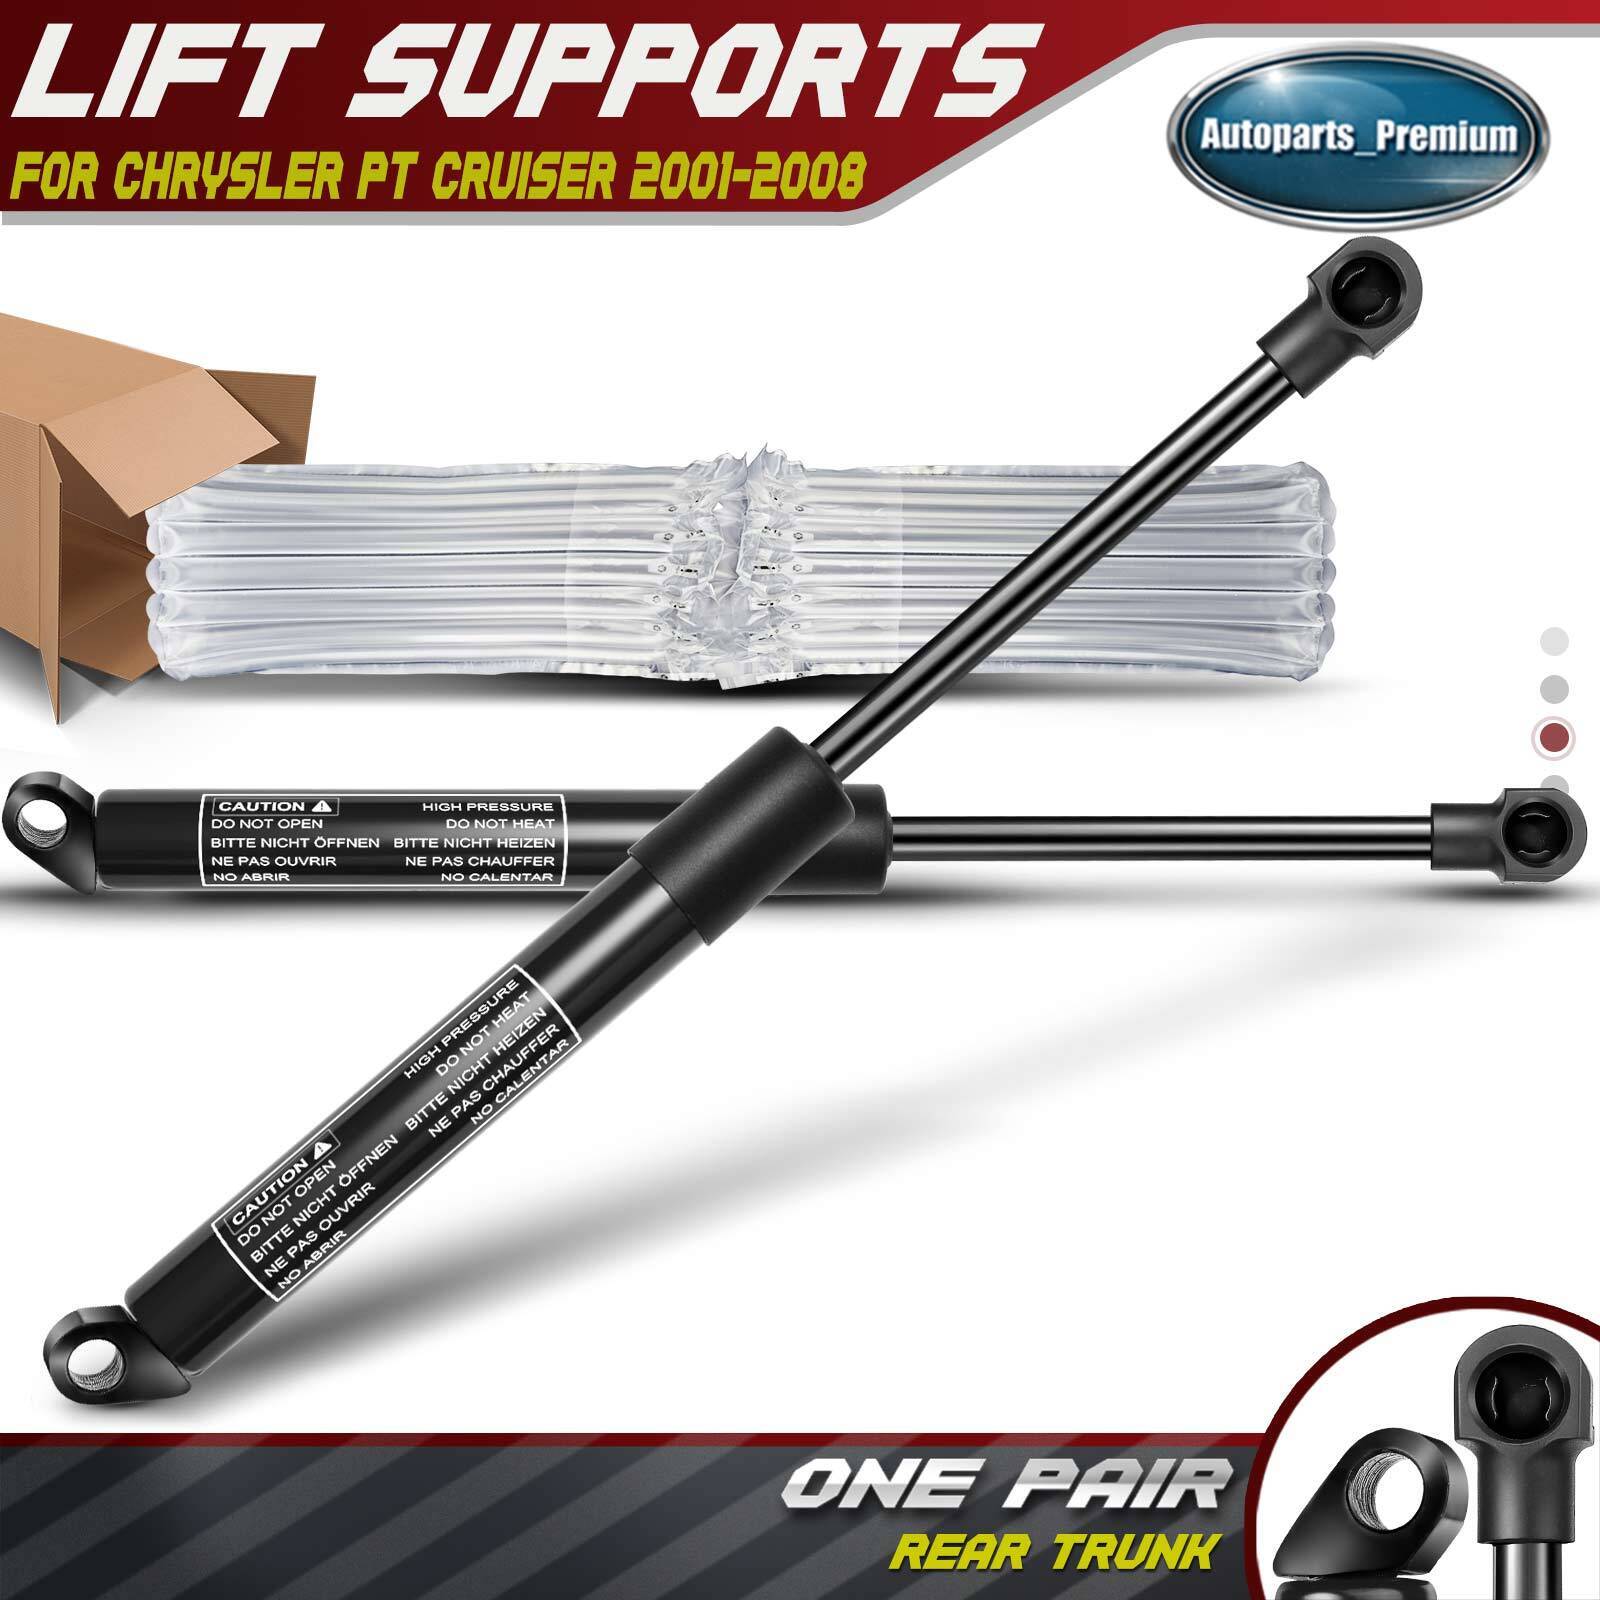 2x Rear Trunk Lift Supports Shocks for Mercedes Benz W220 S350 S500 S65 AMG S600